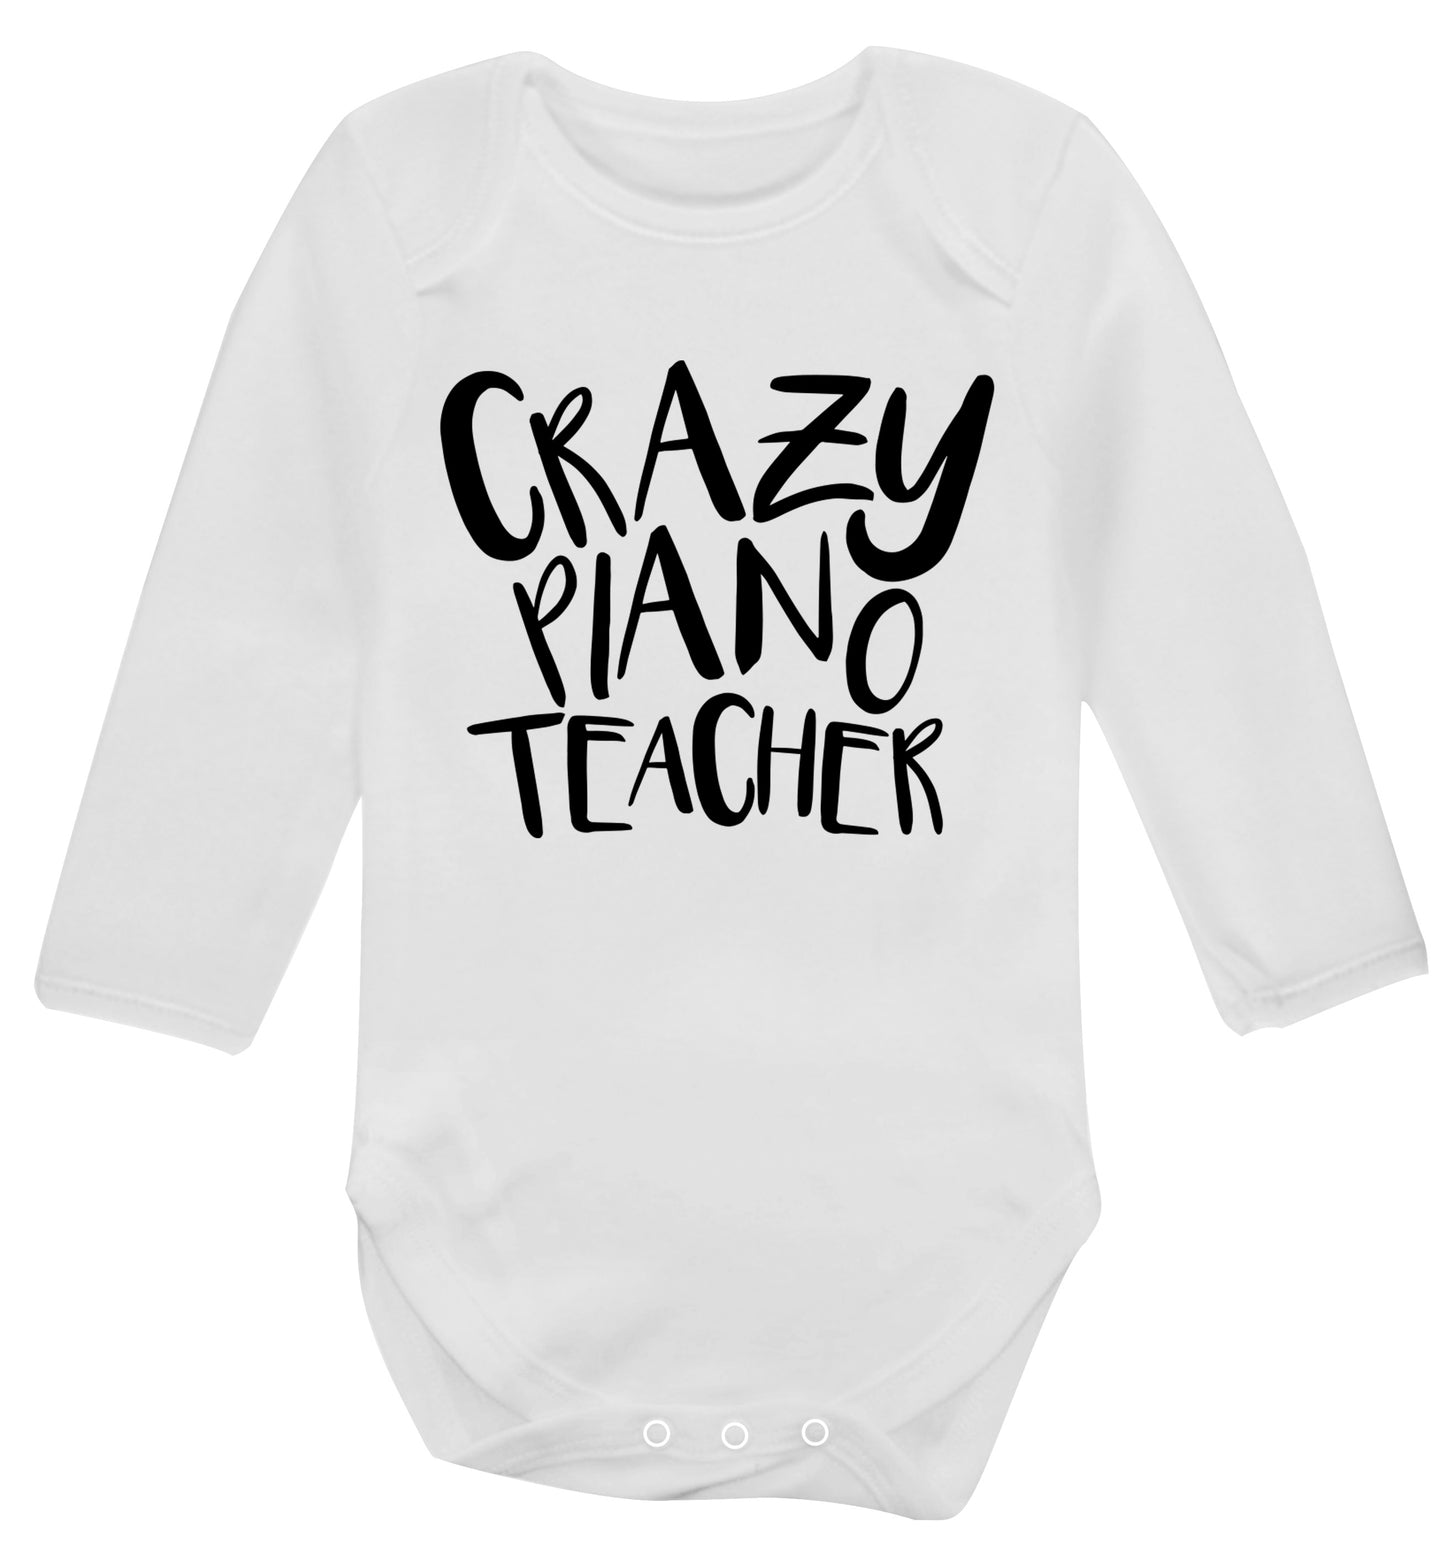 Crazy piano teacher Baby Vest long sleeved white 6-12 months